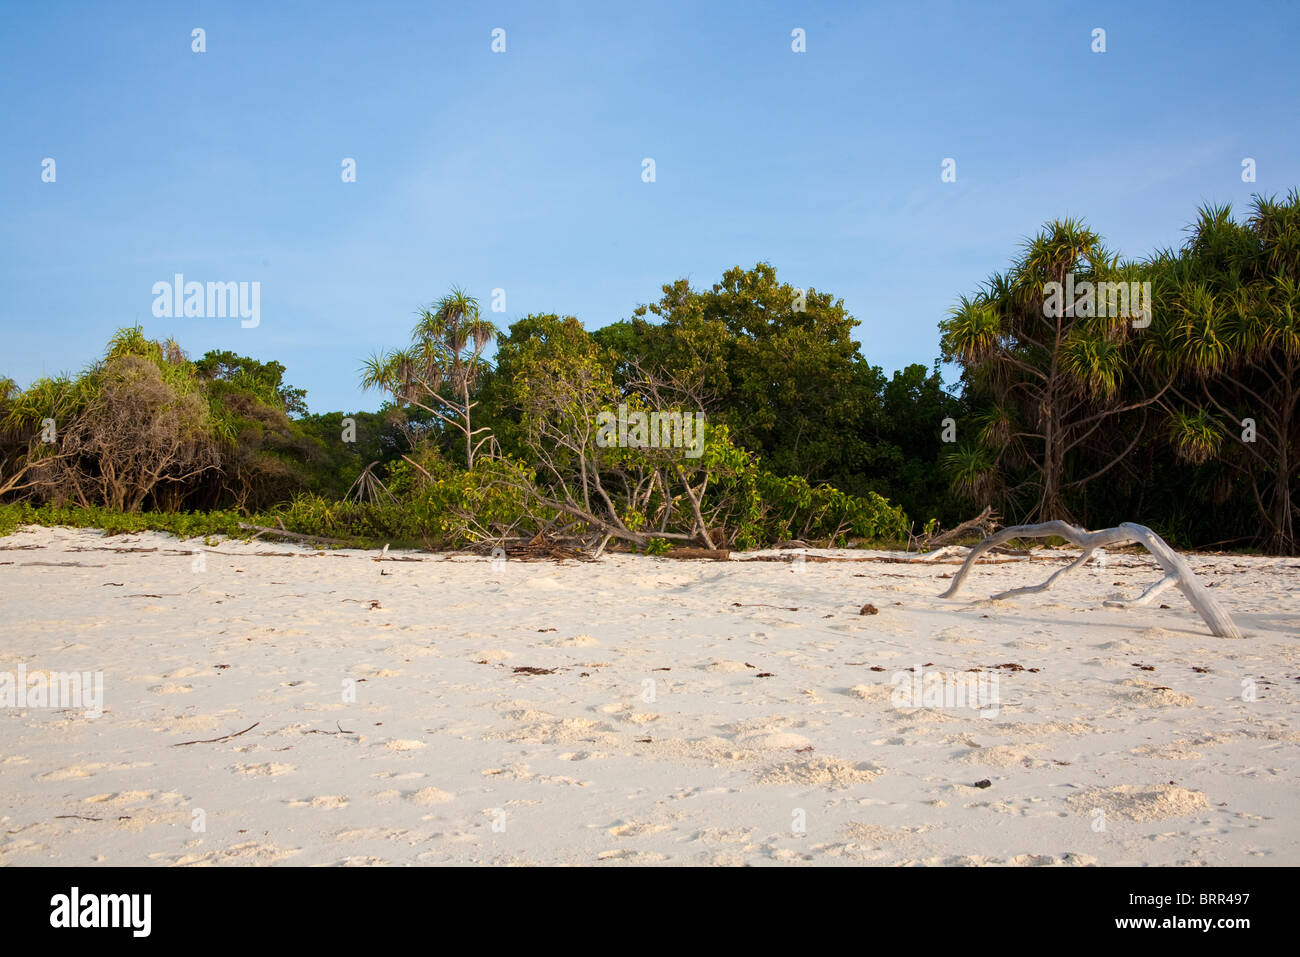 Beach scene with Mangrove forest and driftwood Stock Photo